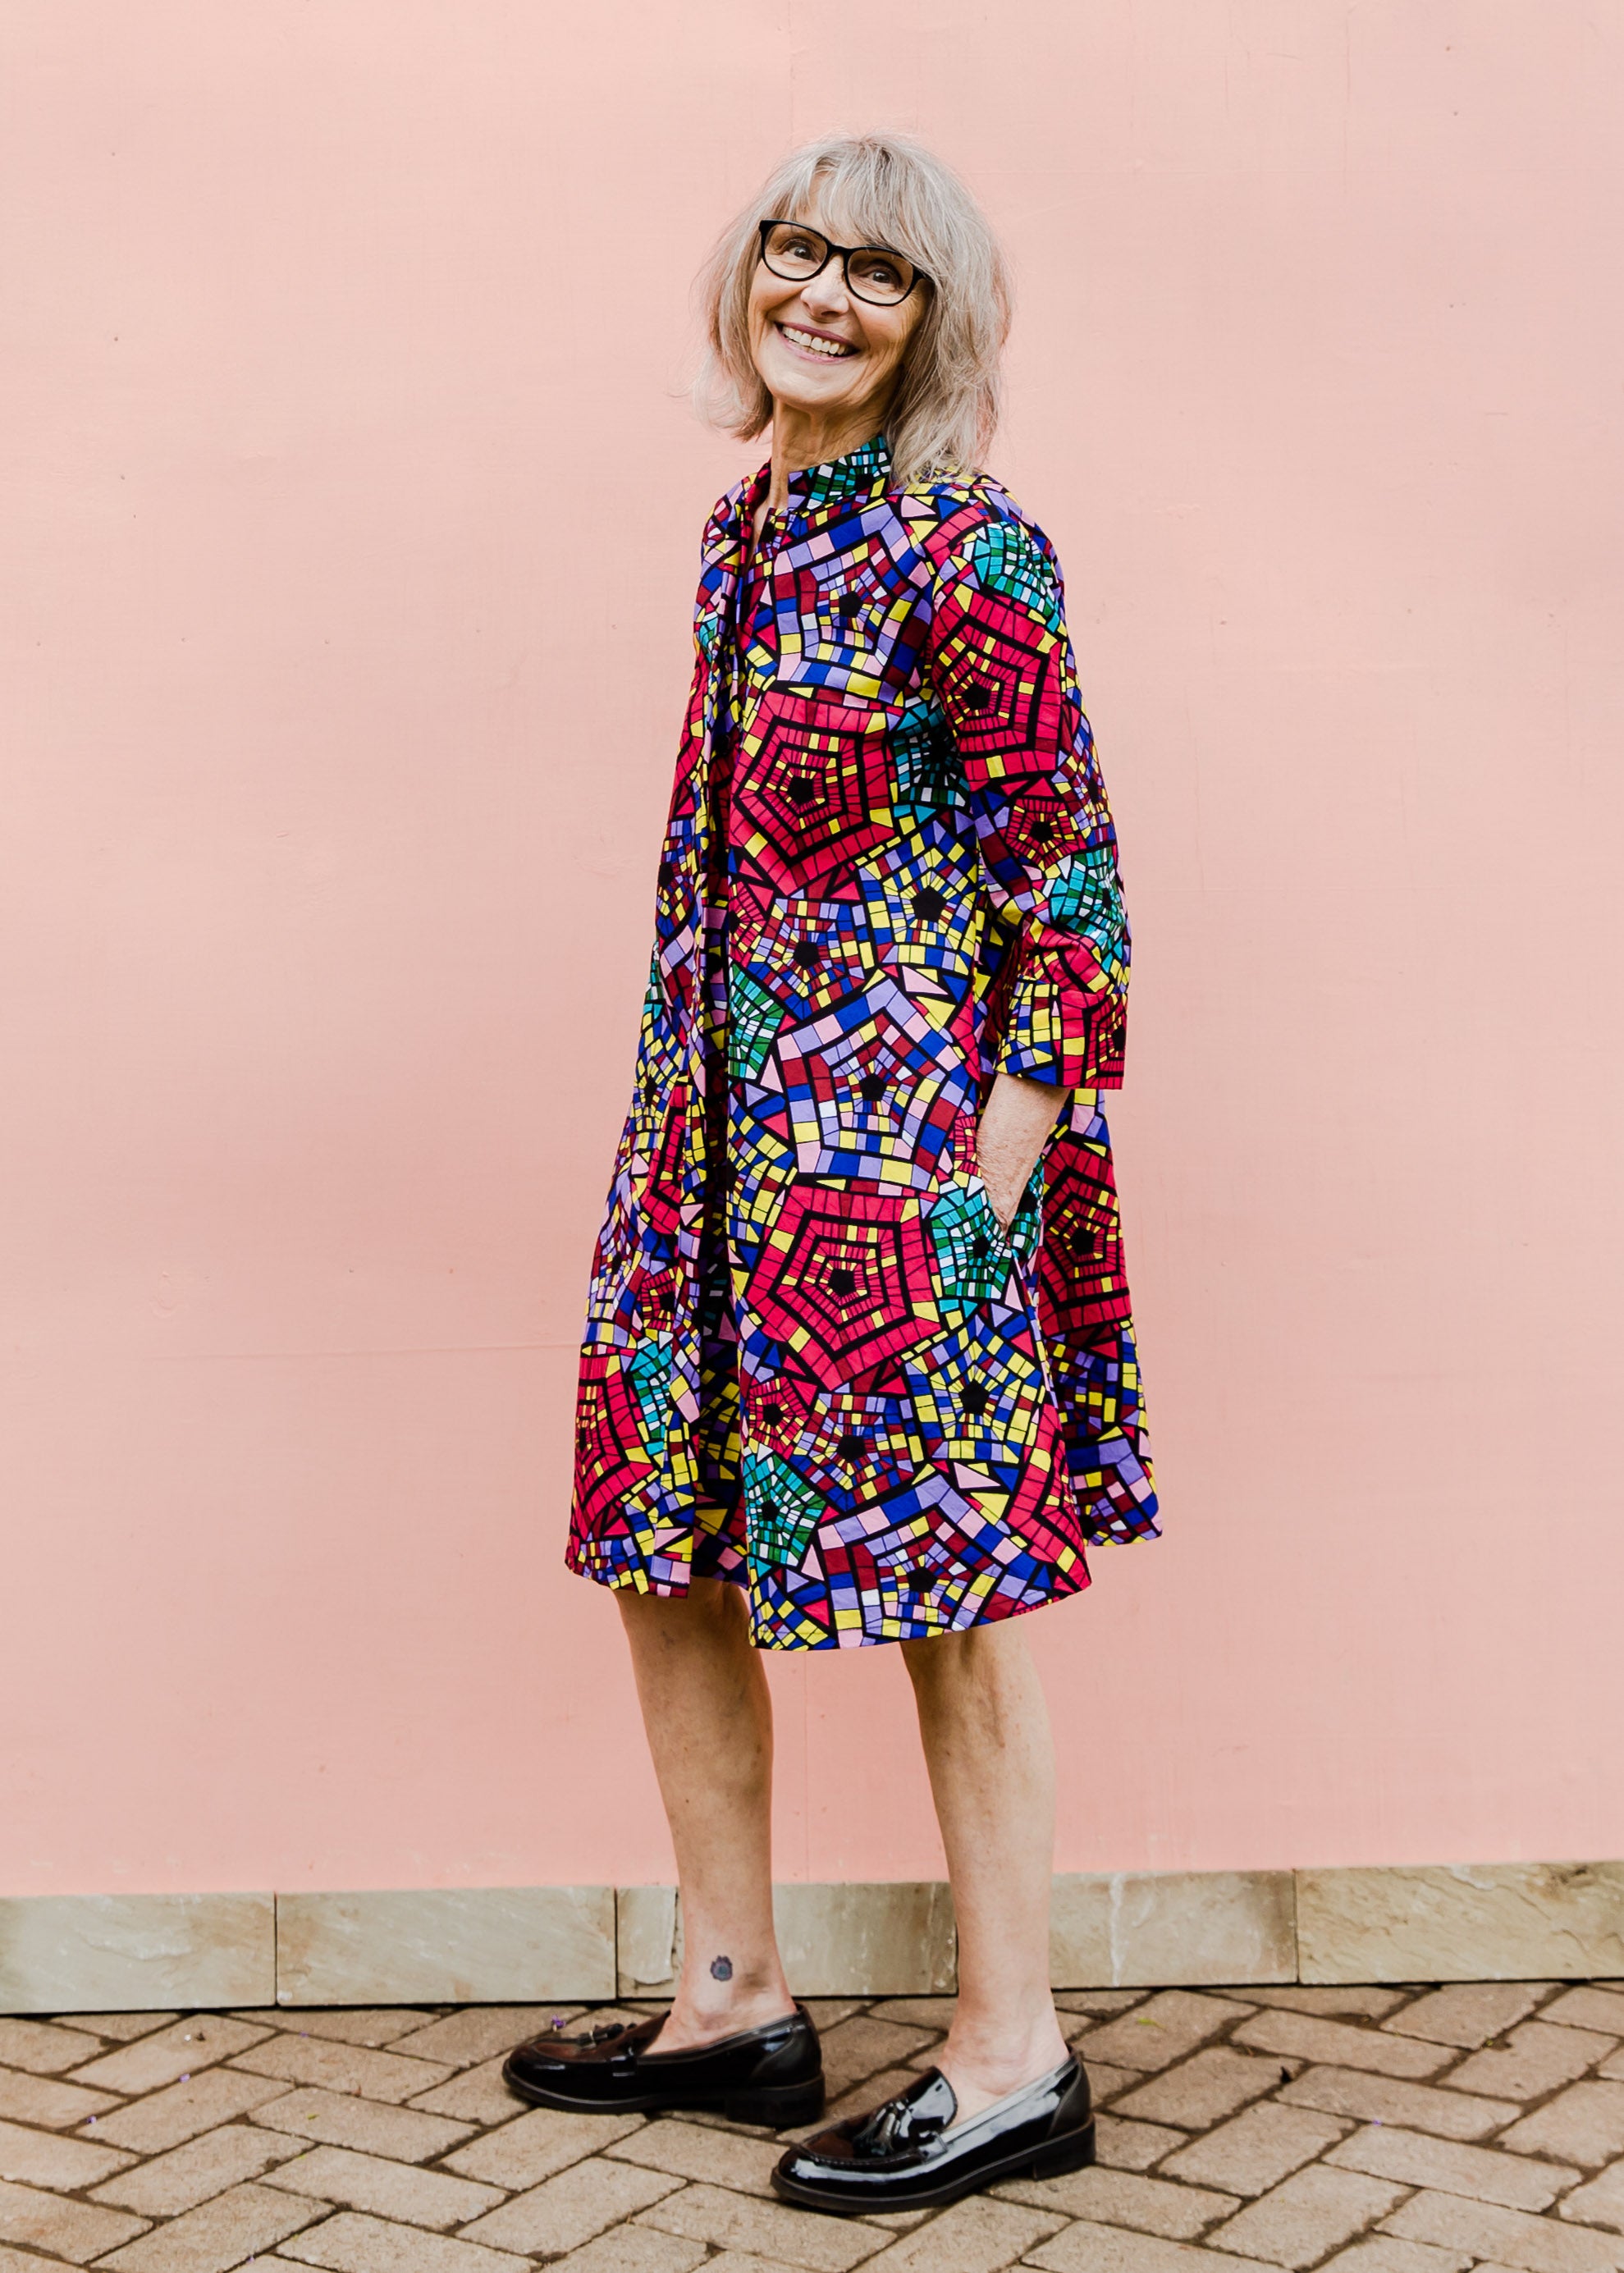 Model wearing rainbow print dress, paired with black loafers.